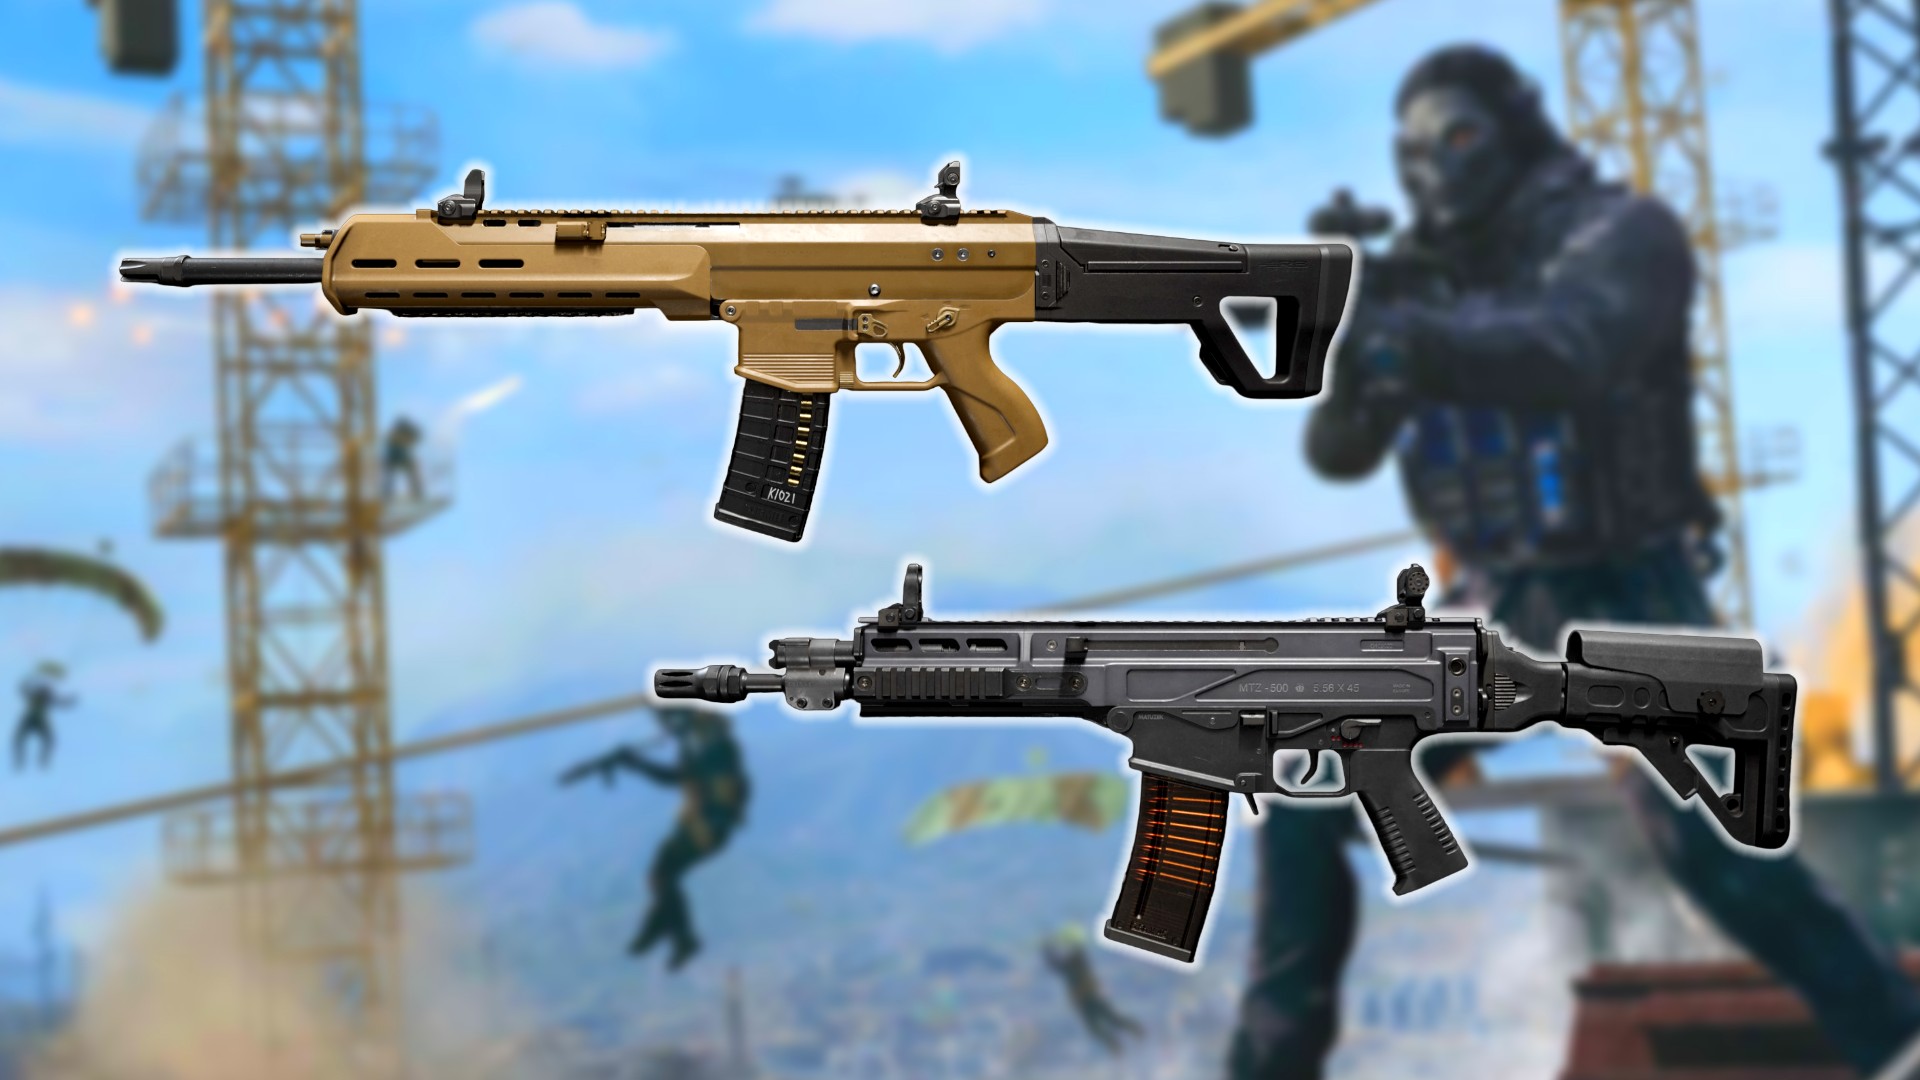 The Golden Overpowered Airsoft AK47 You Will WANT. 